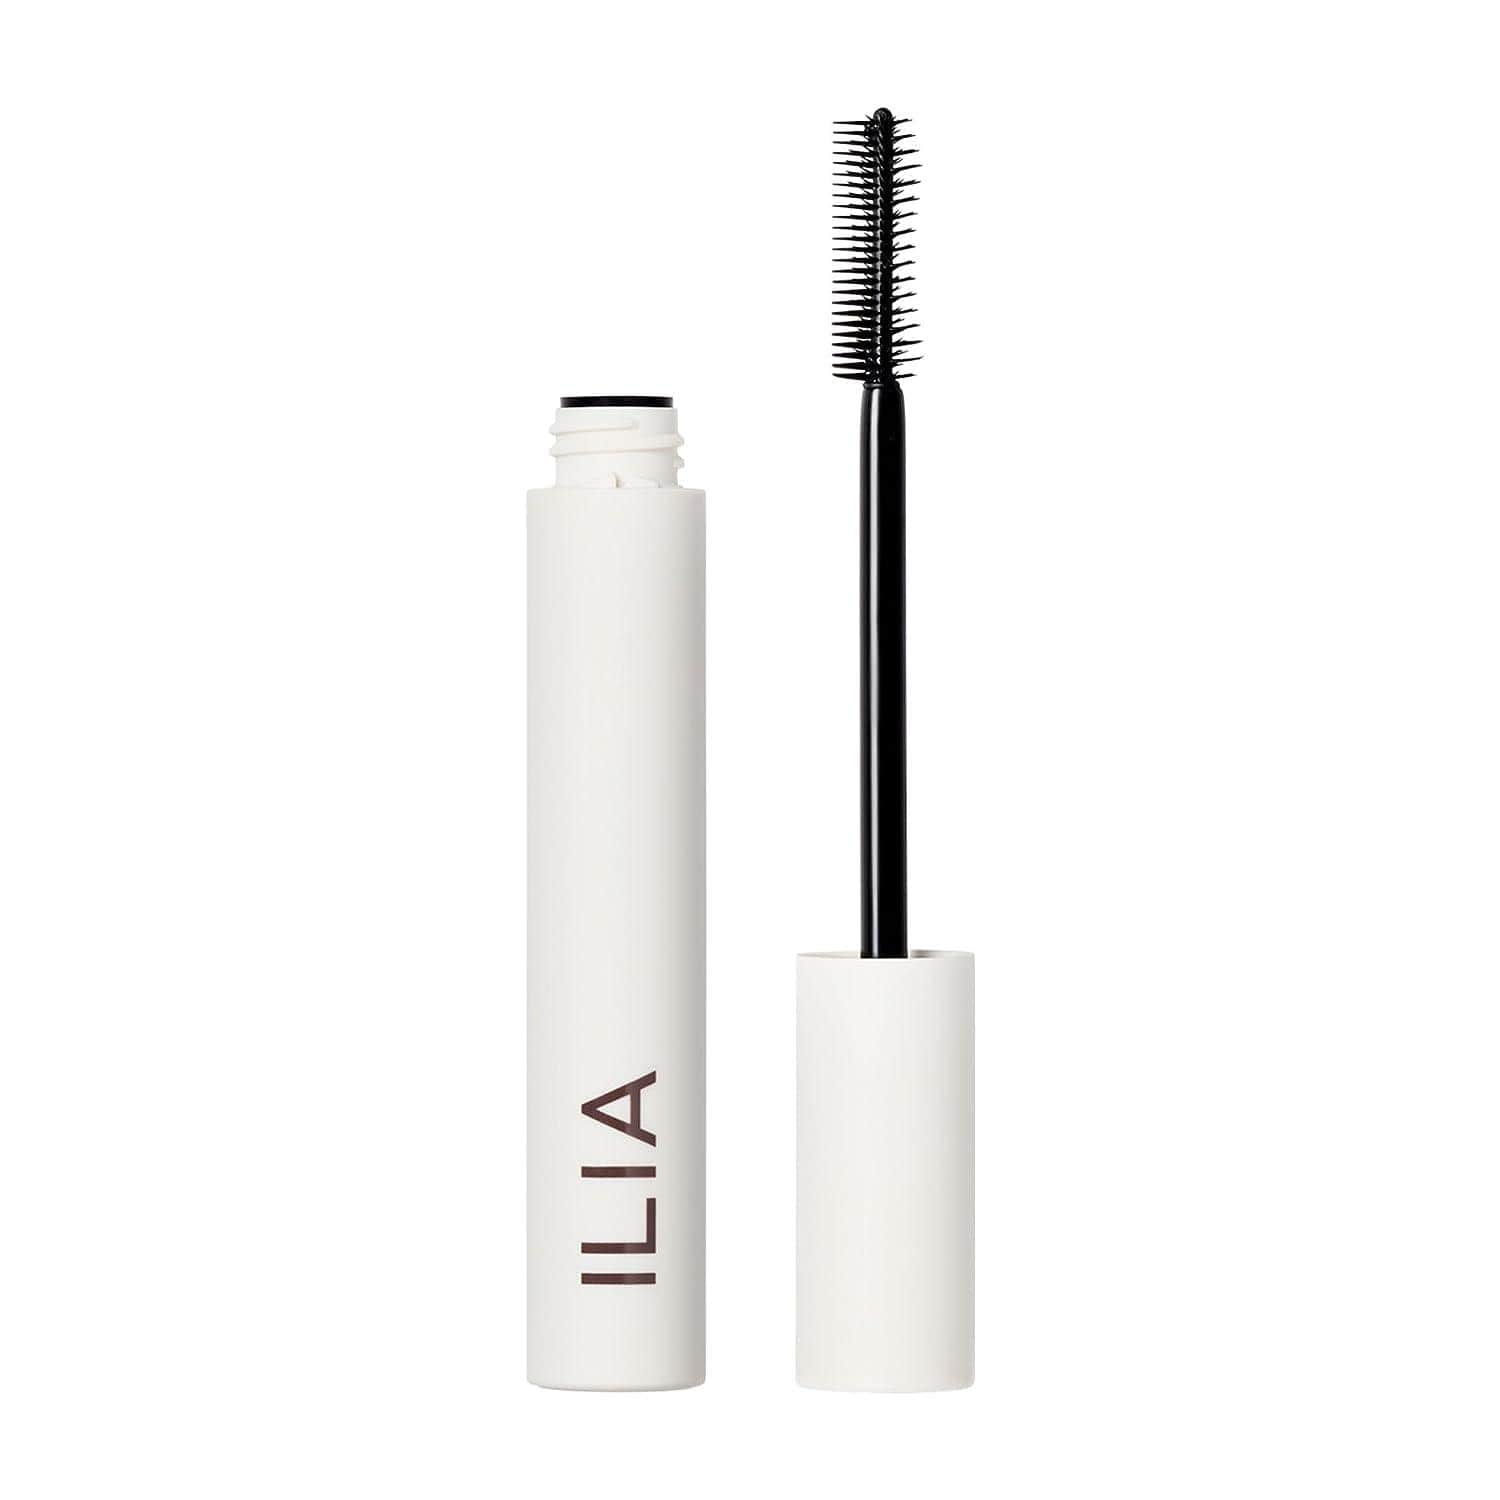 this comfortable mascara, ophthalmologist-tested, features a gentle formula with keratin and shea butter for length and boldness in one swipe, boosted by a dual-side applicator for enhanced curl, volume, length, and separation.